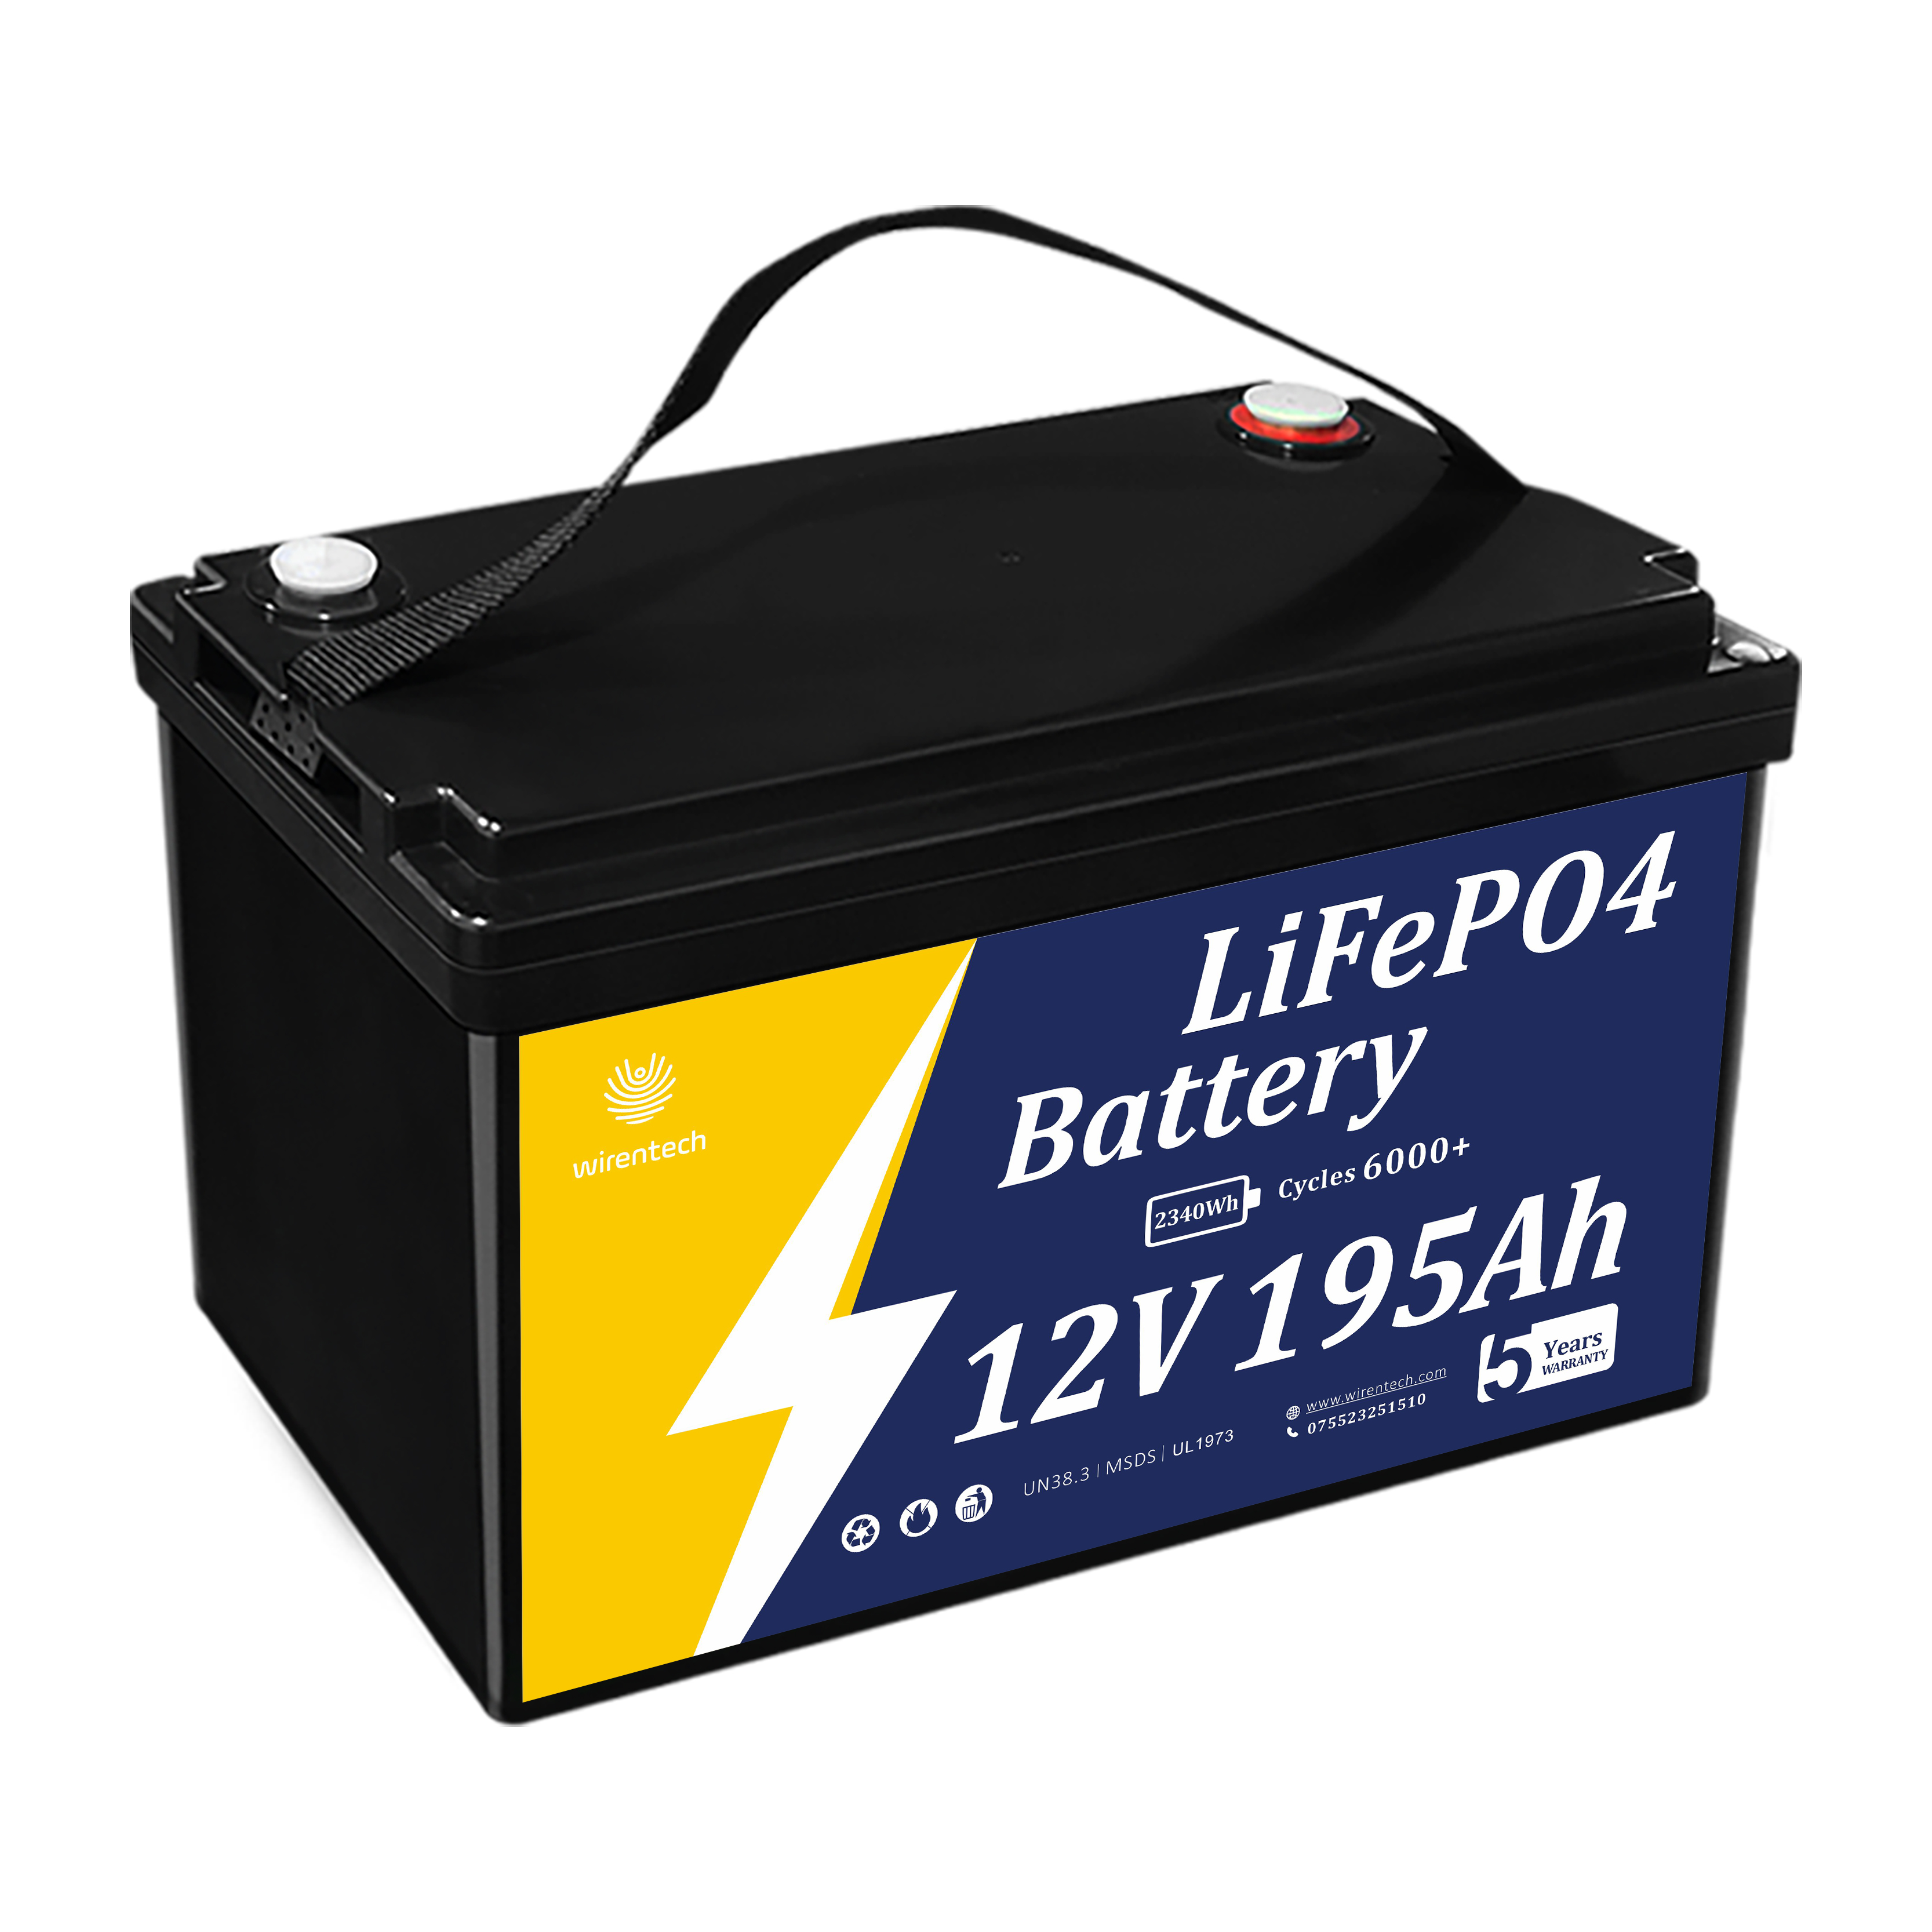 12V 190Ah 195Ah Lithium Iron Phosphate Powder Lithium Ion Battery 30 Kwh Lifepo4 Battery Canada Off-grid Container Home